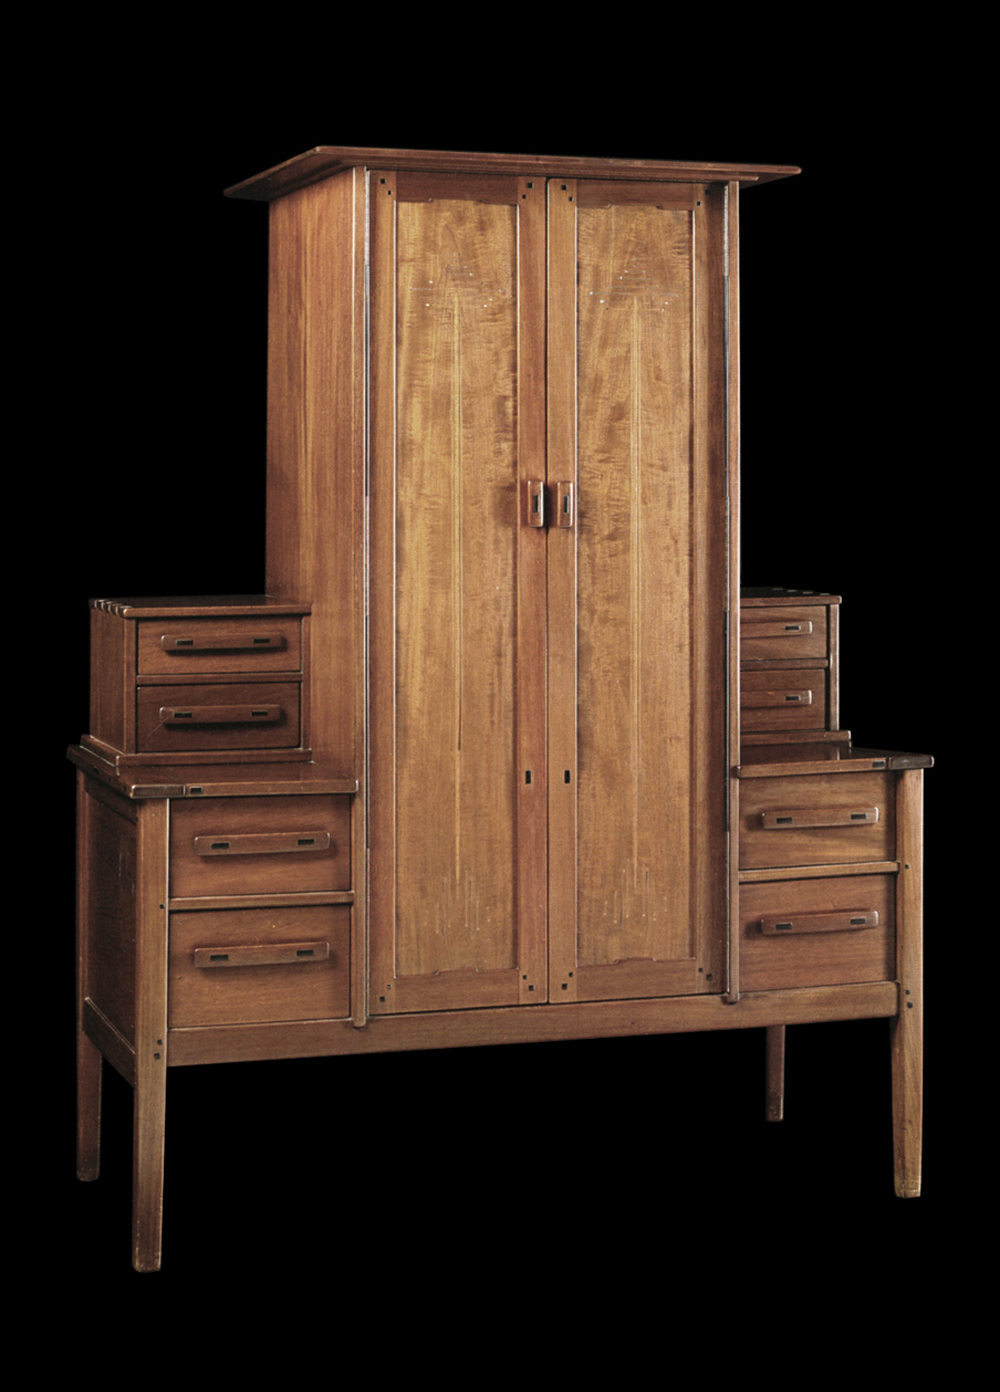 Greene & Greene Chiffonier, ca. 1908, 65 ⅝ x 55 x 27 ¾ in. Produced in the workshop of John and Peter Hall, Pasadena, California.